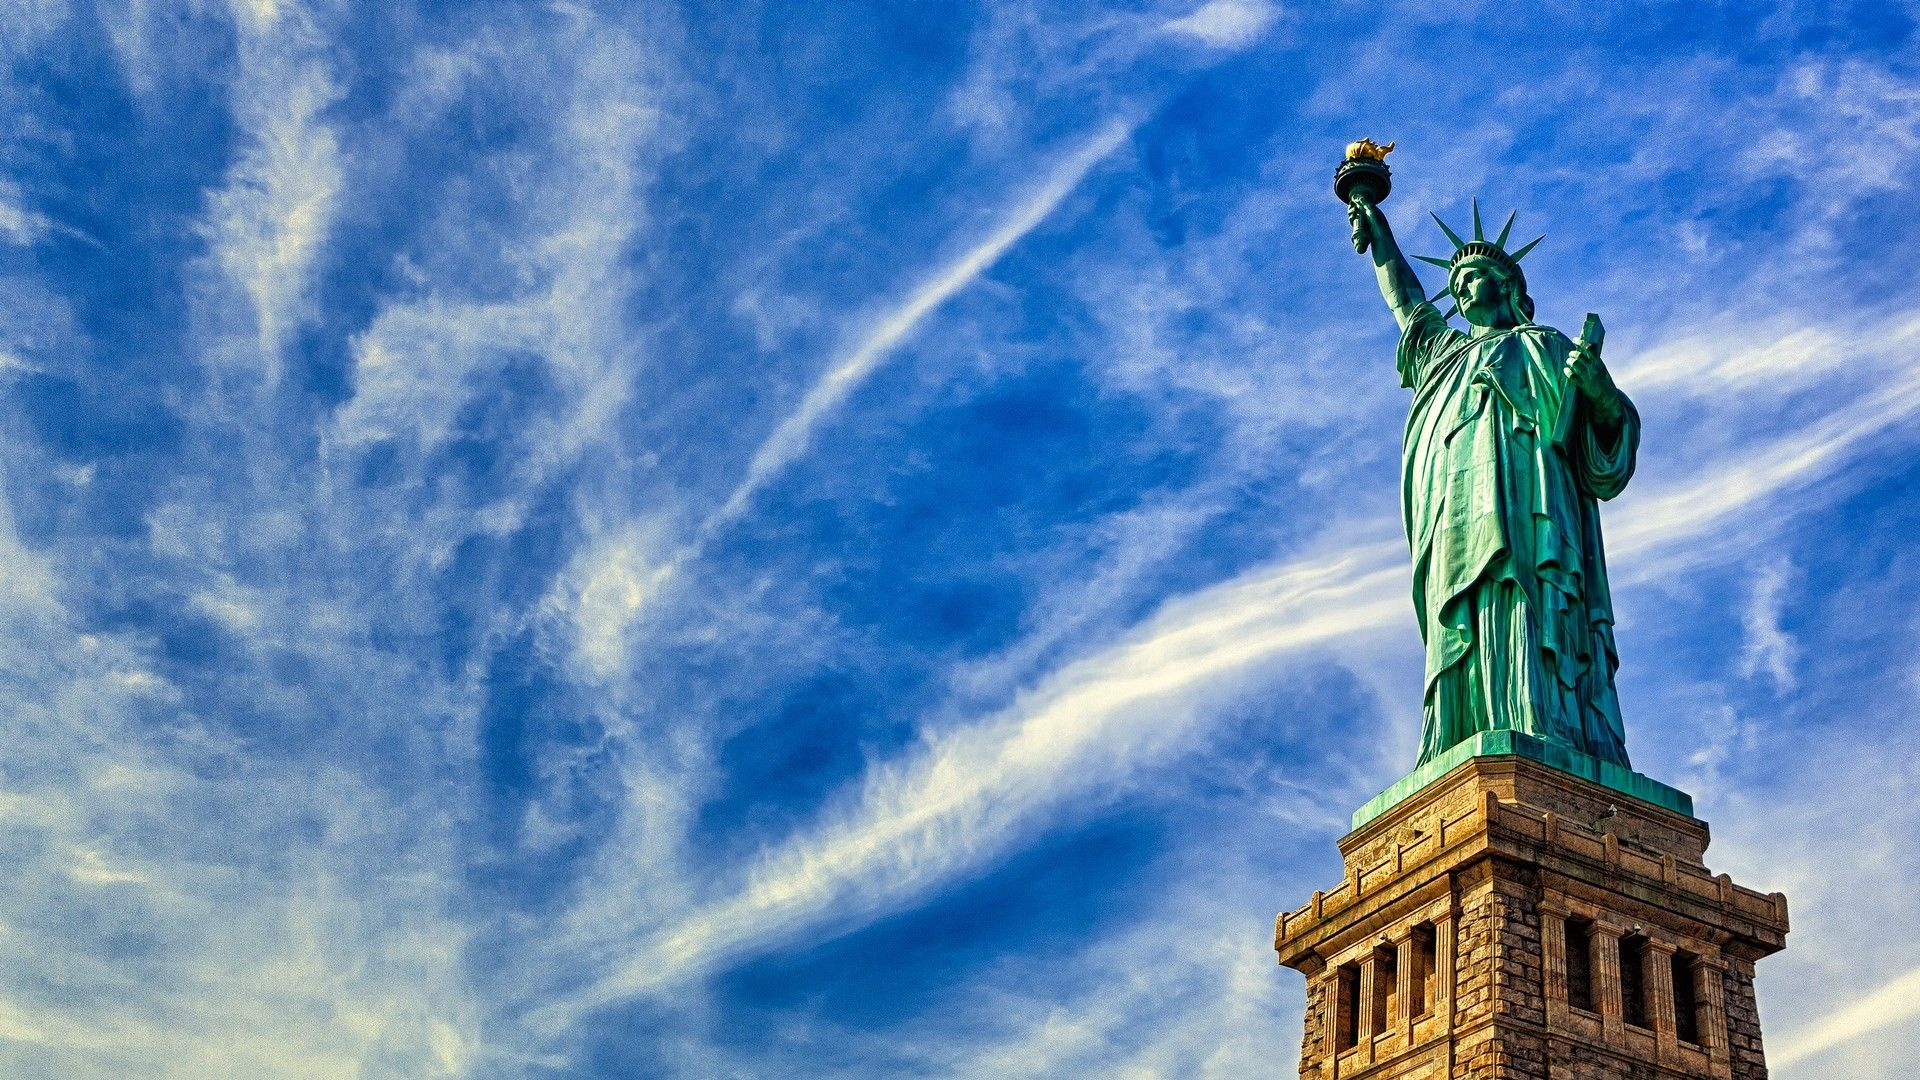 1920x1080 Statue of Liberty Wallpapers Top Free Statue of Liberty Backgrounds